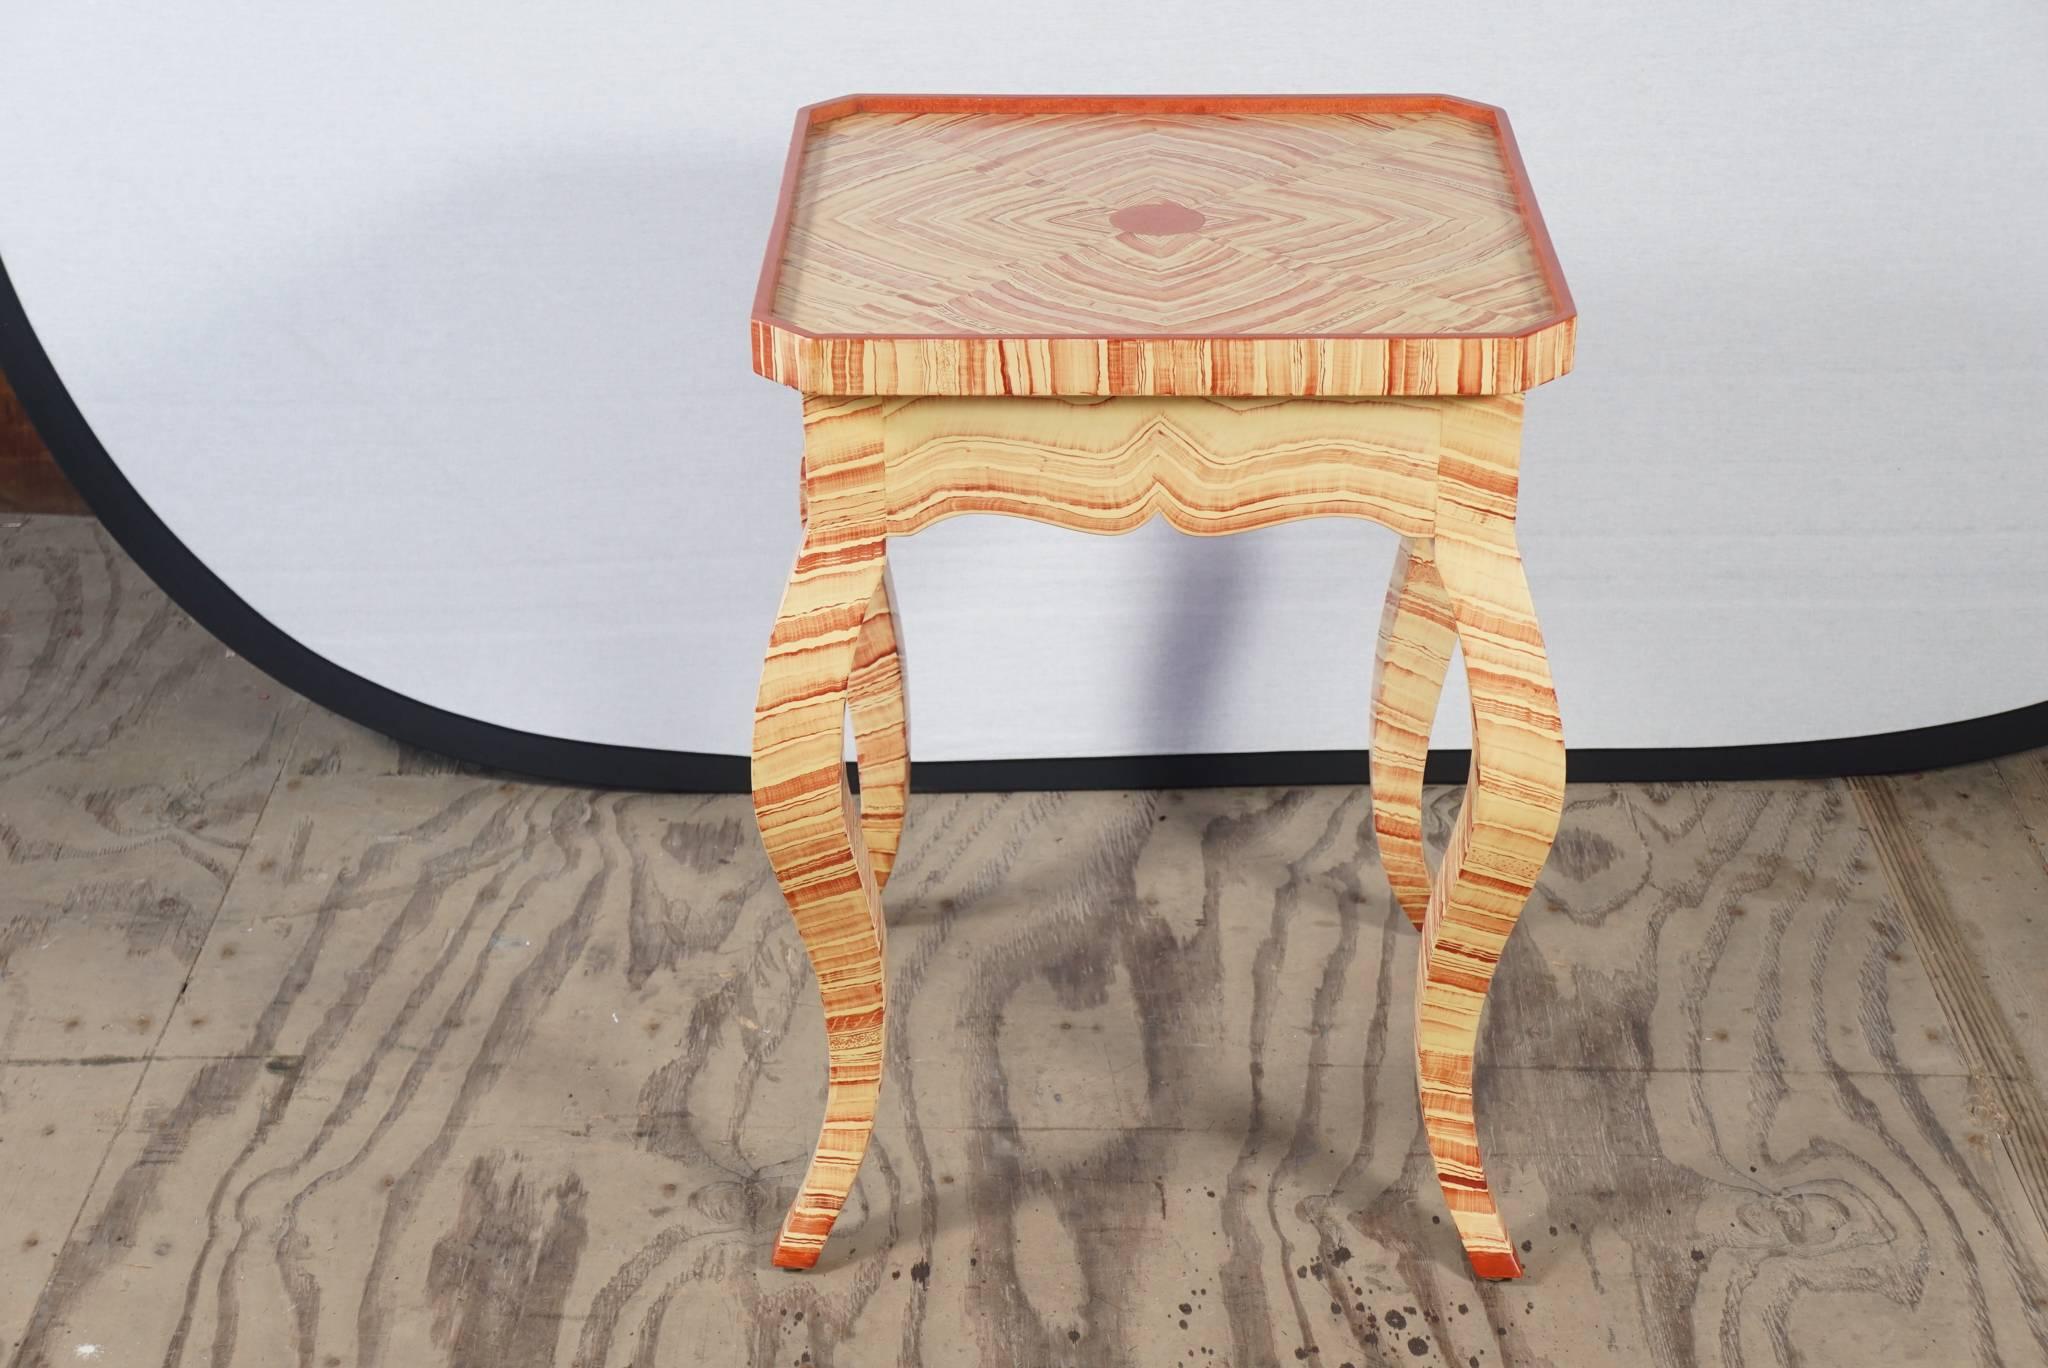 This table made in an Italian style with a tray top and canted corners with cabriole legs is painted in an agate patten that is bookmatched thru out. The colors are deep and rich on a creamy ground and the painter has signed and dated his work which